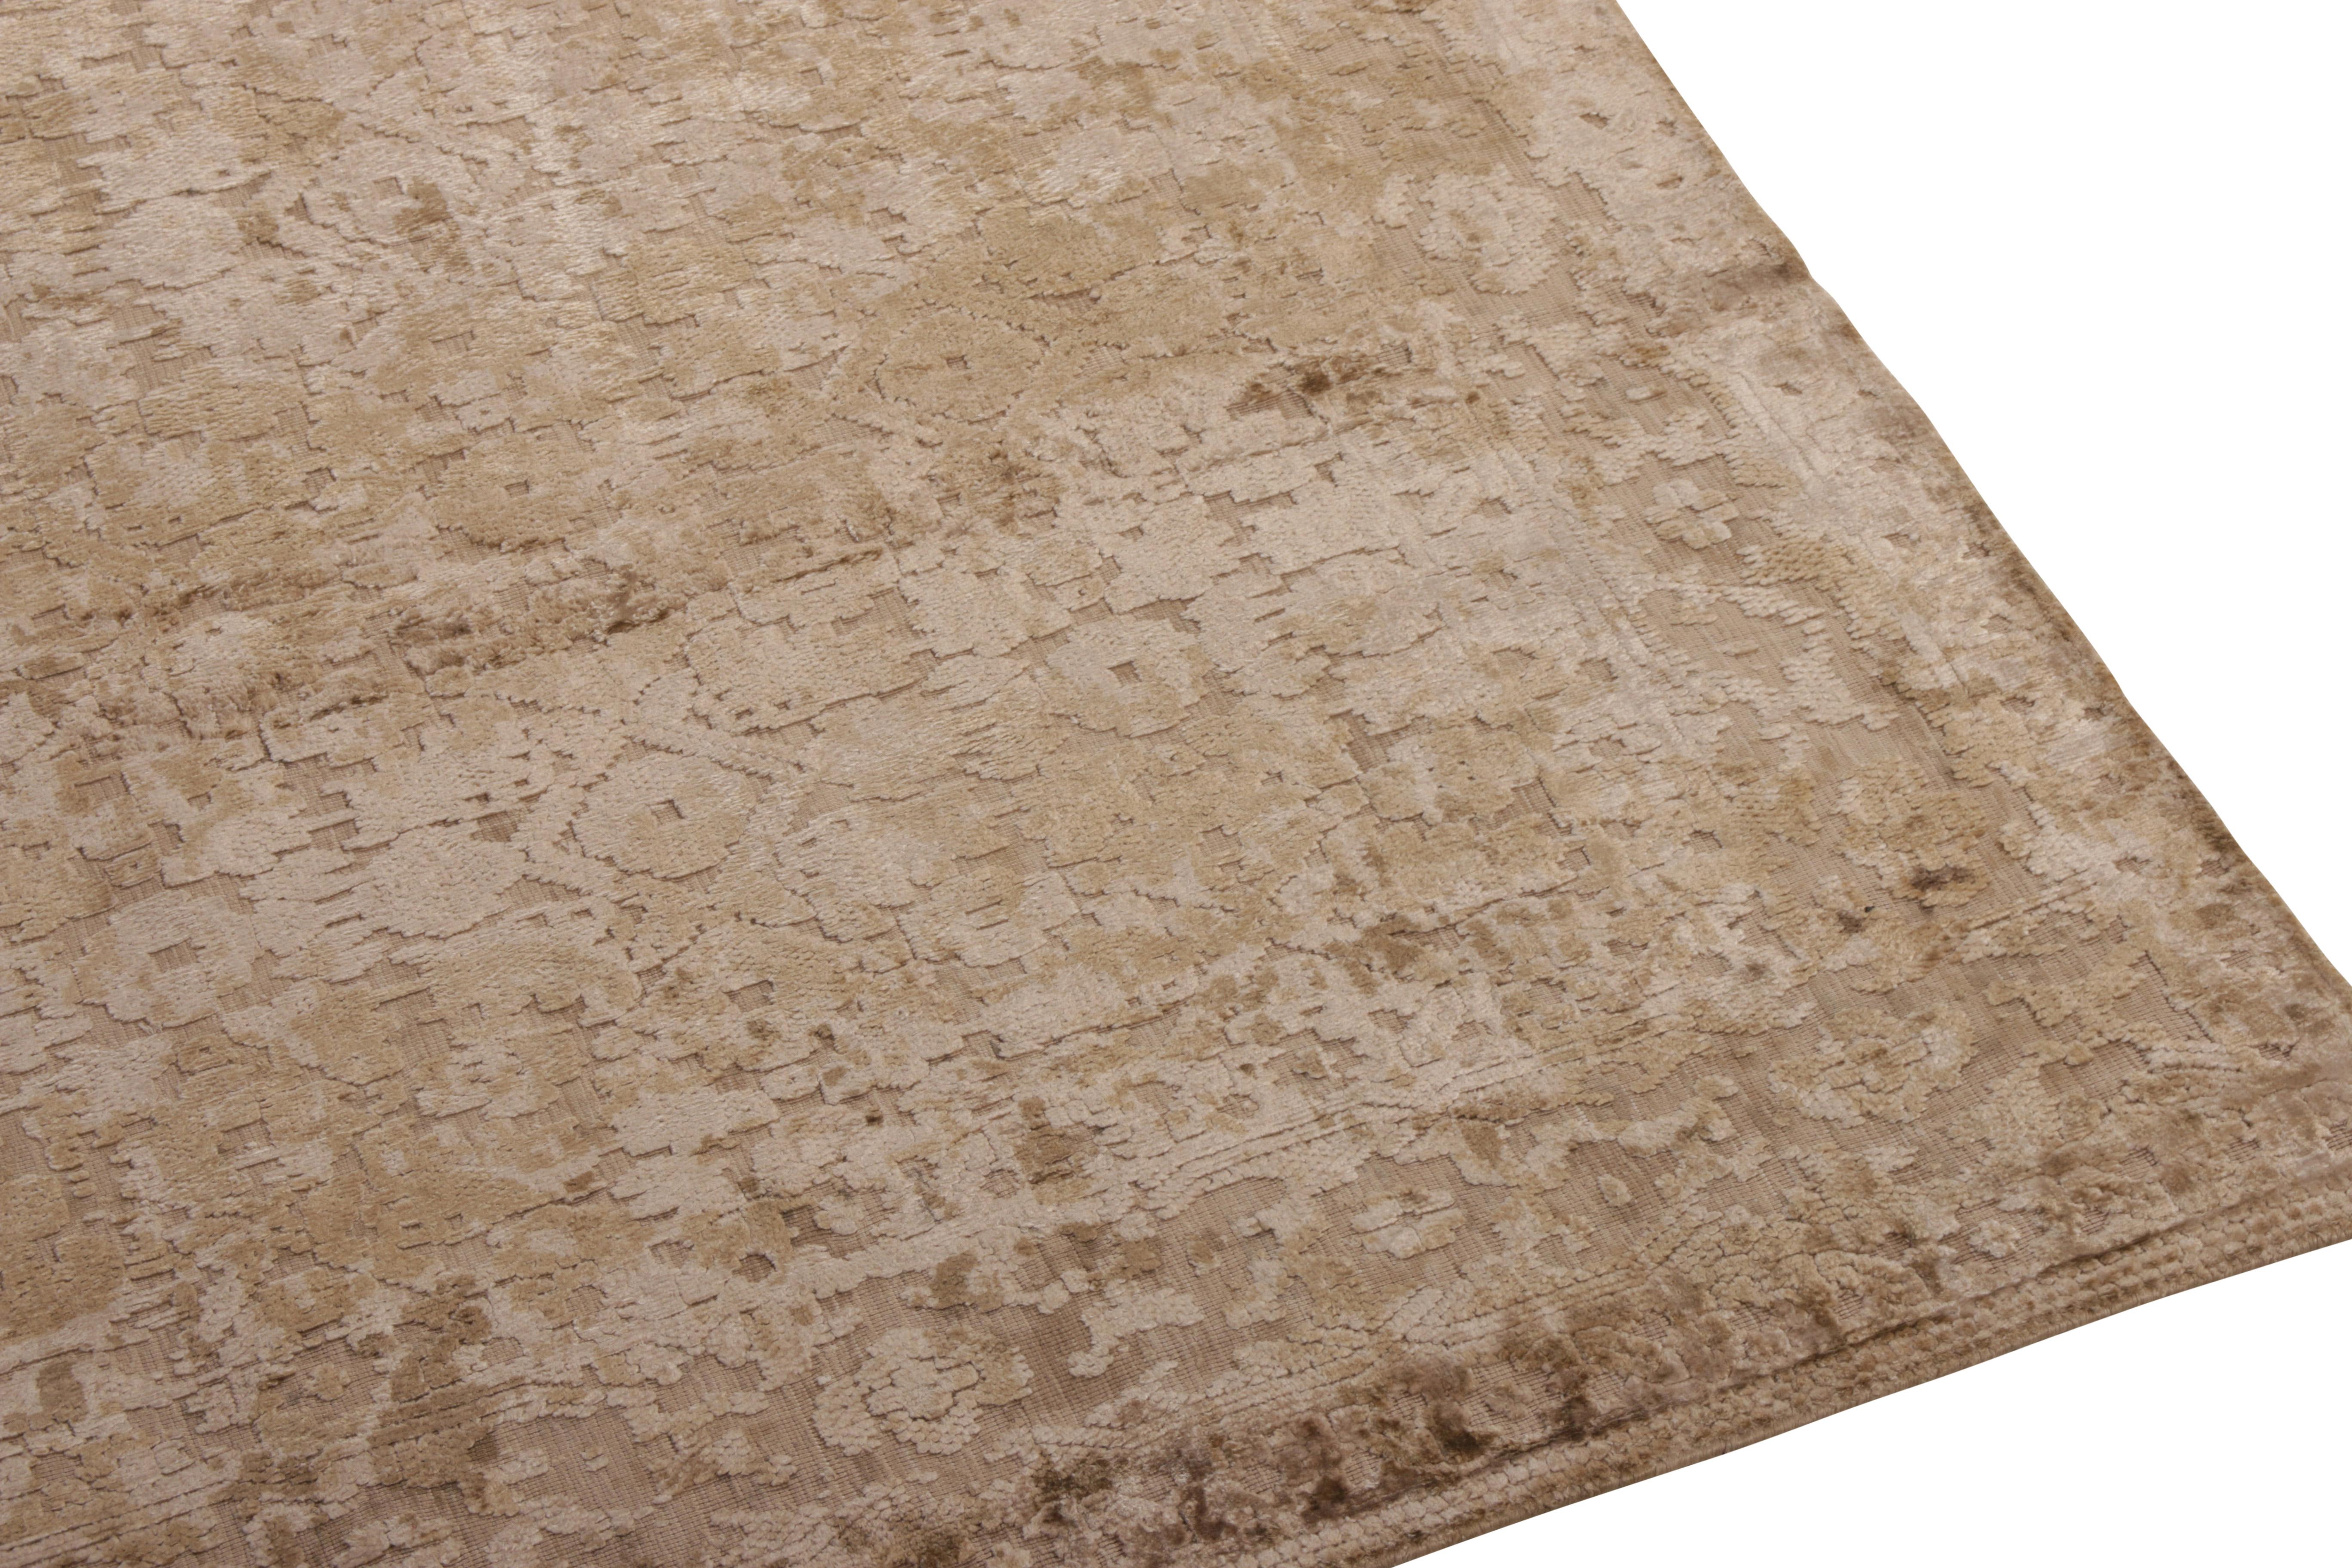 Modern Rug & Kilim 's Hand Knotted Traditional Silk Rug Beige Brown Herati Pattern For Sale